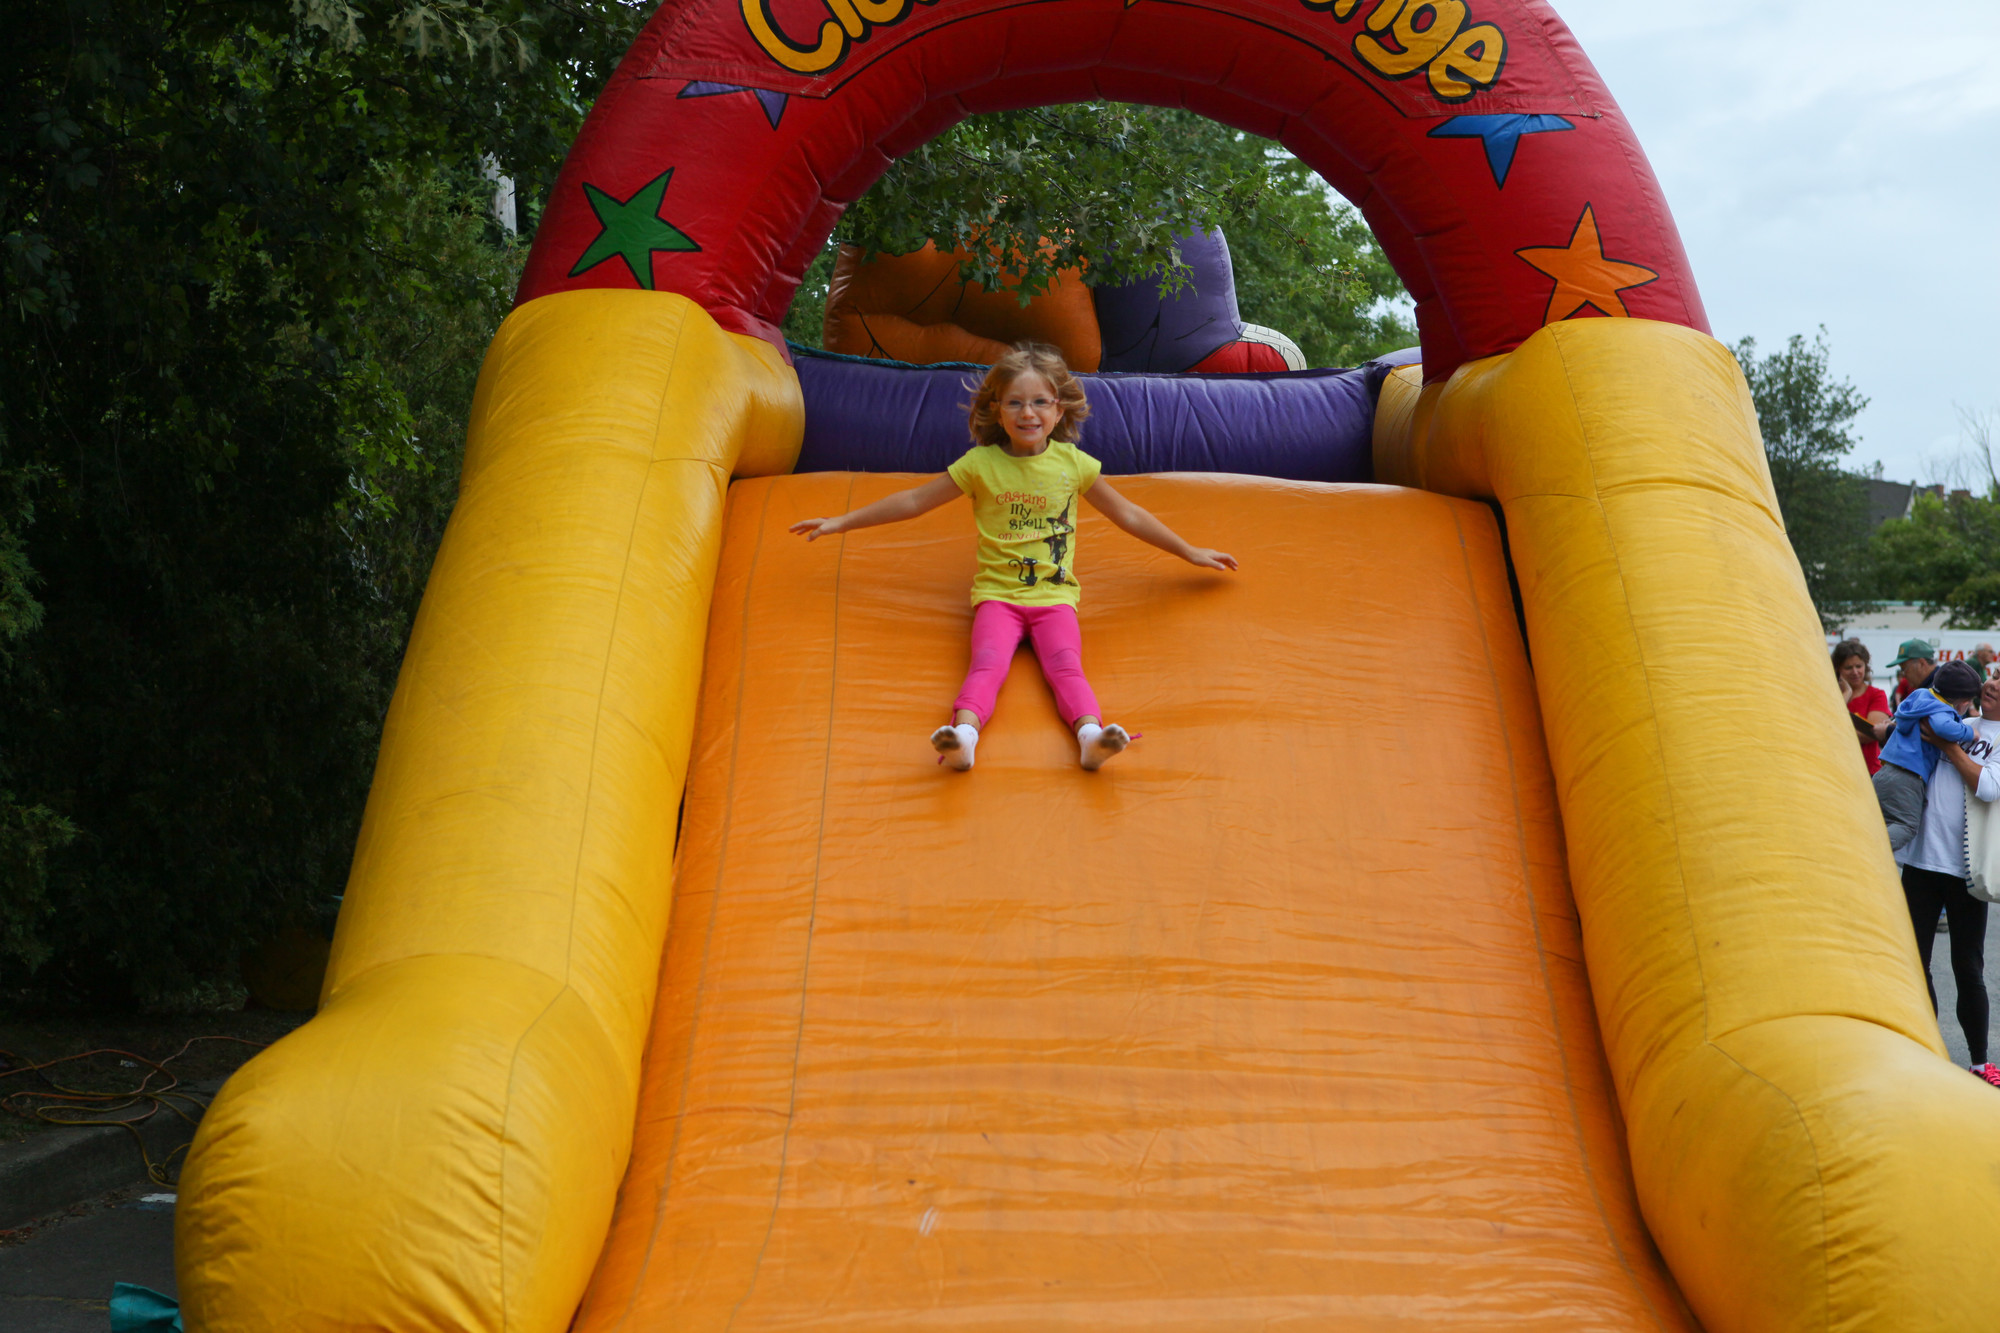 Anna Demos, 4, smiled as she slid down one of the inflatable at the Kids Fest at the Rockville Centre Recreation Center.